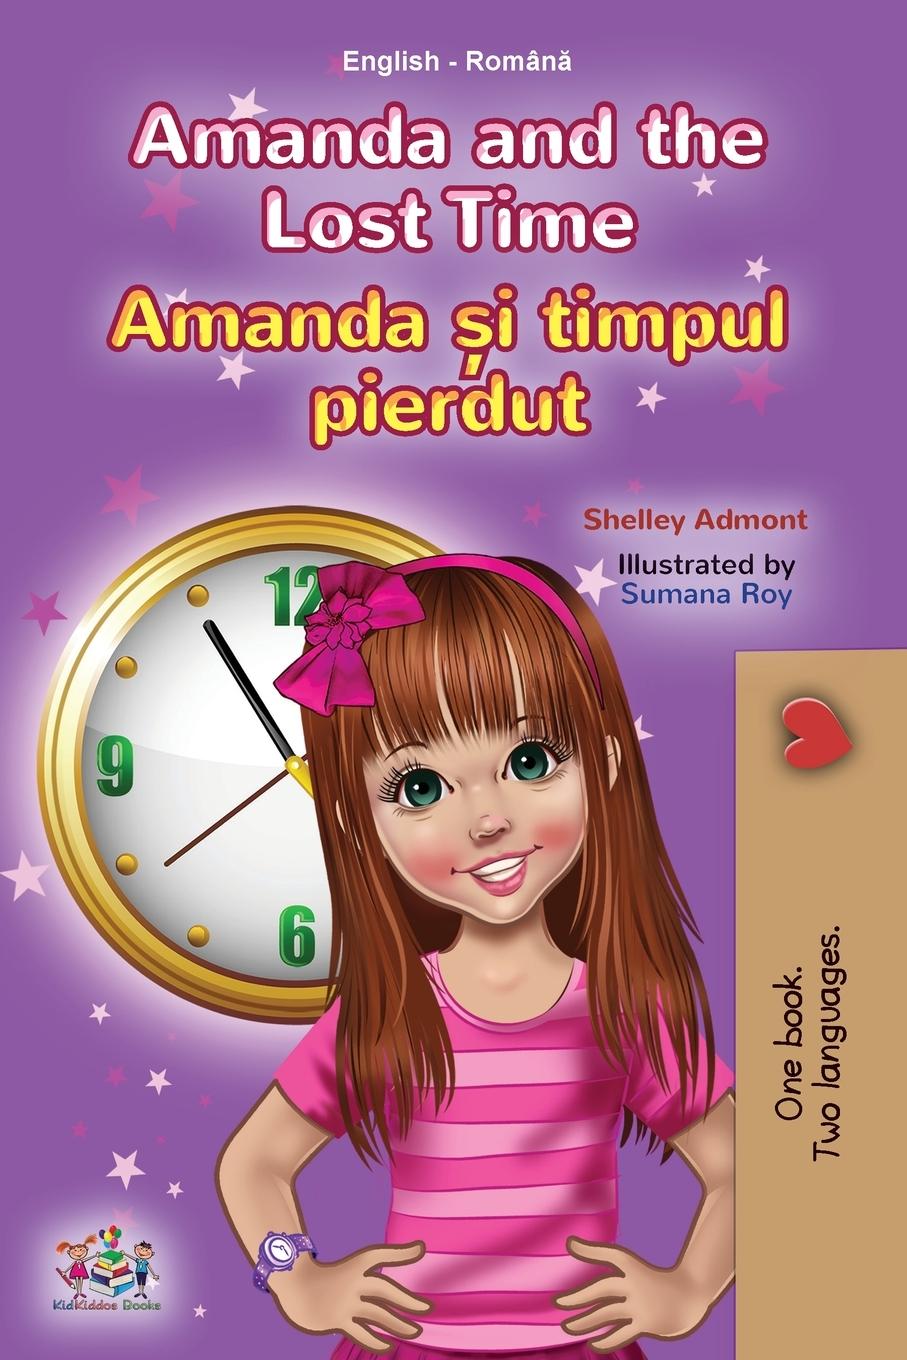 Könyv Amanda and the Lost Time (English Romanian Bilingual Book for Kids) Kidkiddos Books